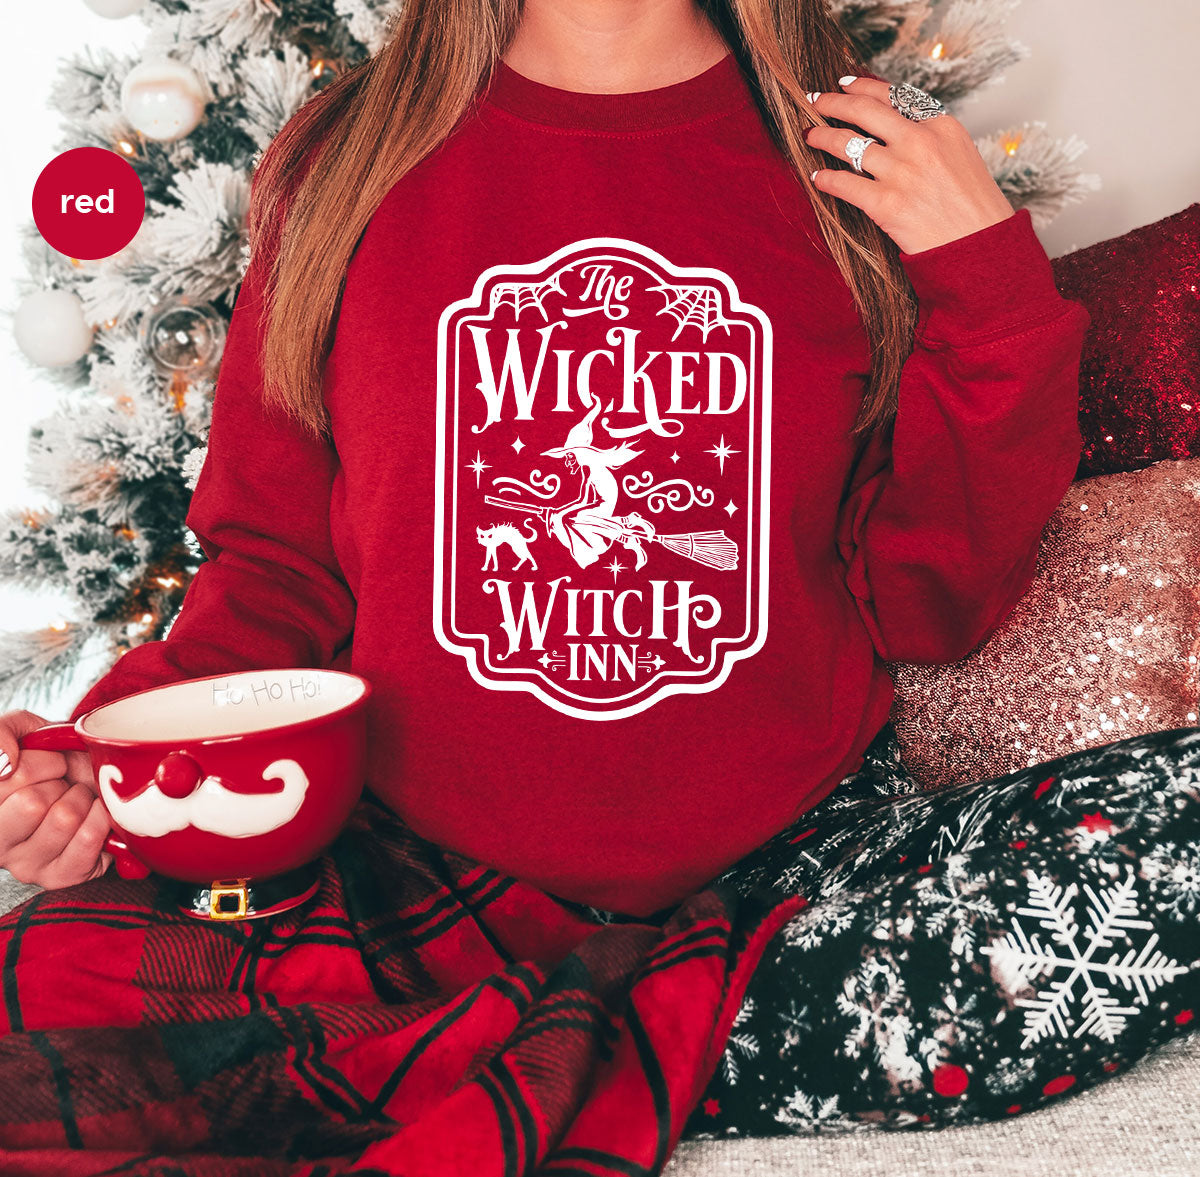 Witch Crewneck Sweatshirt, Halloween Shirts for Women, Funny Gift For Her, Spooky Season Party Tshirt, Witchy Graphic Tees